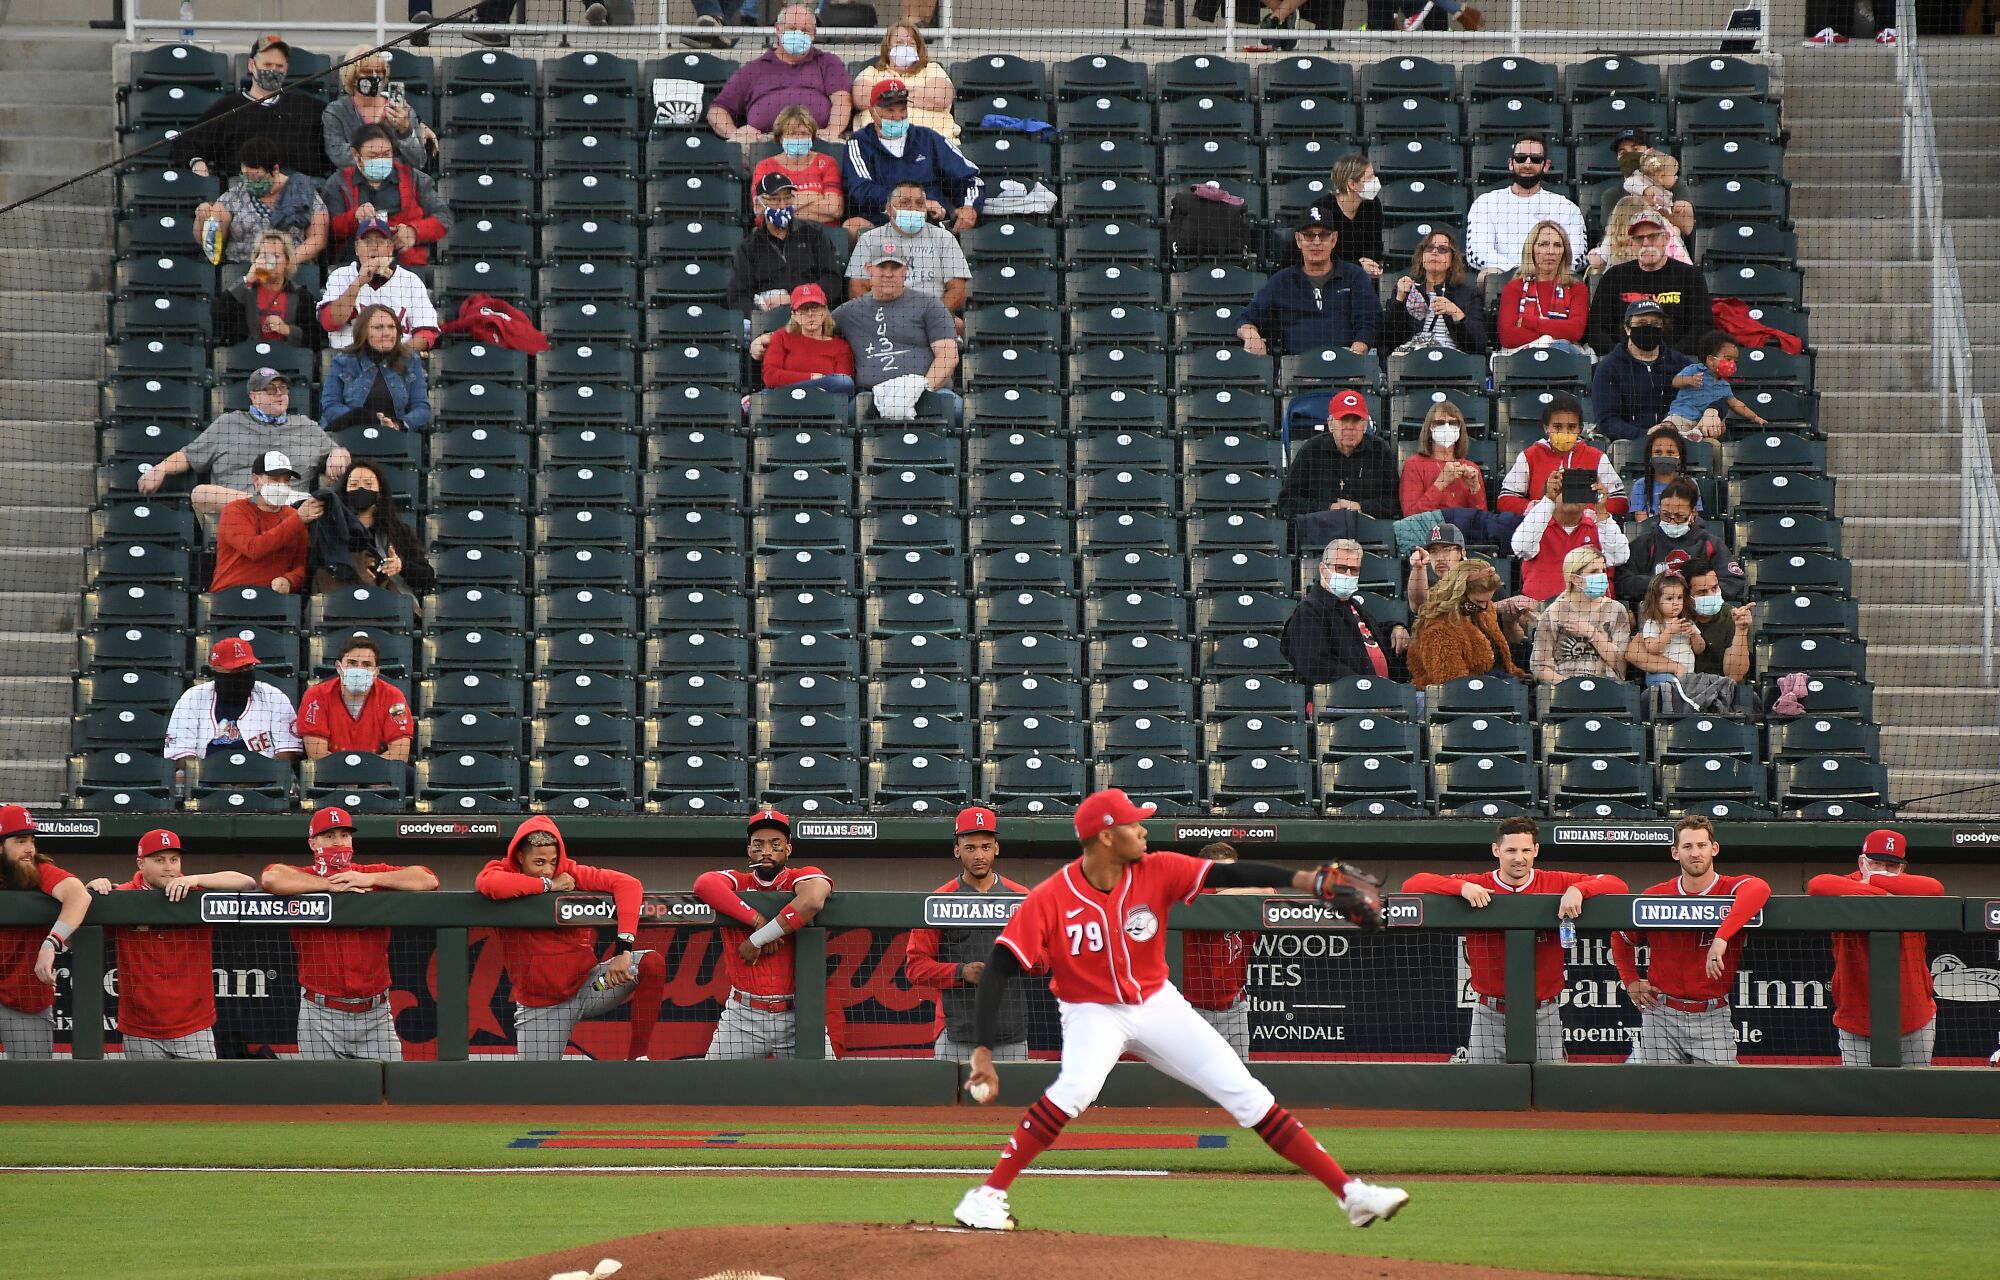 Fans and the Angels bench watch a Reds pitcher throw during Tuesday's game at spring training in Goodyear, Ariz.